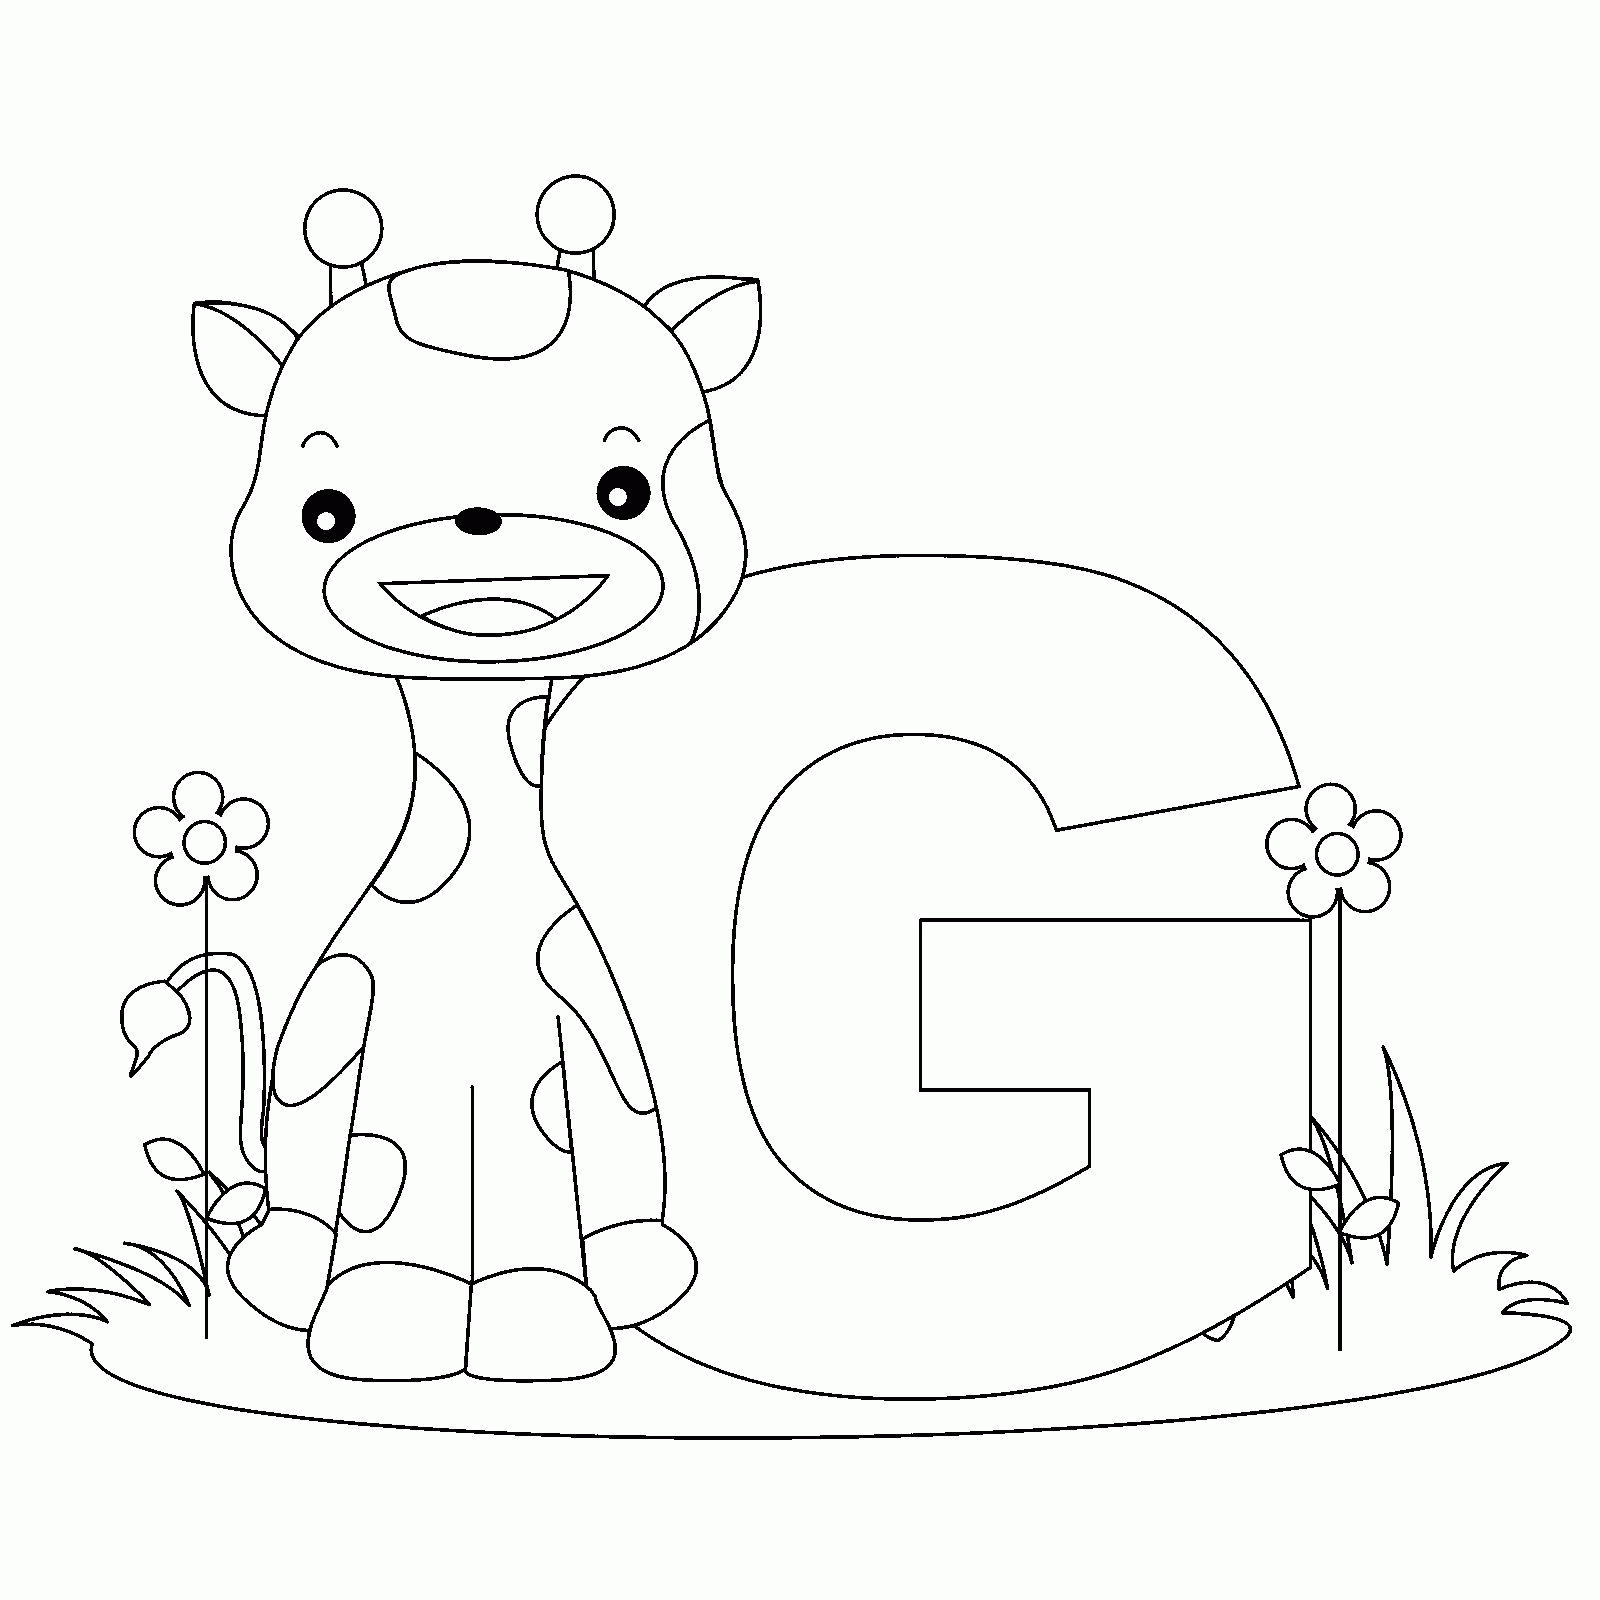 Coloring Pages Letter G - Coloring